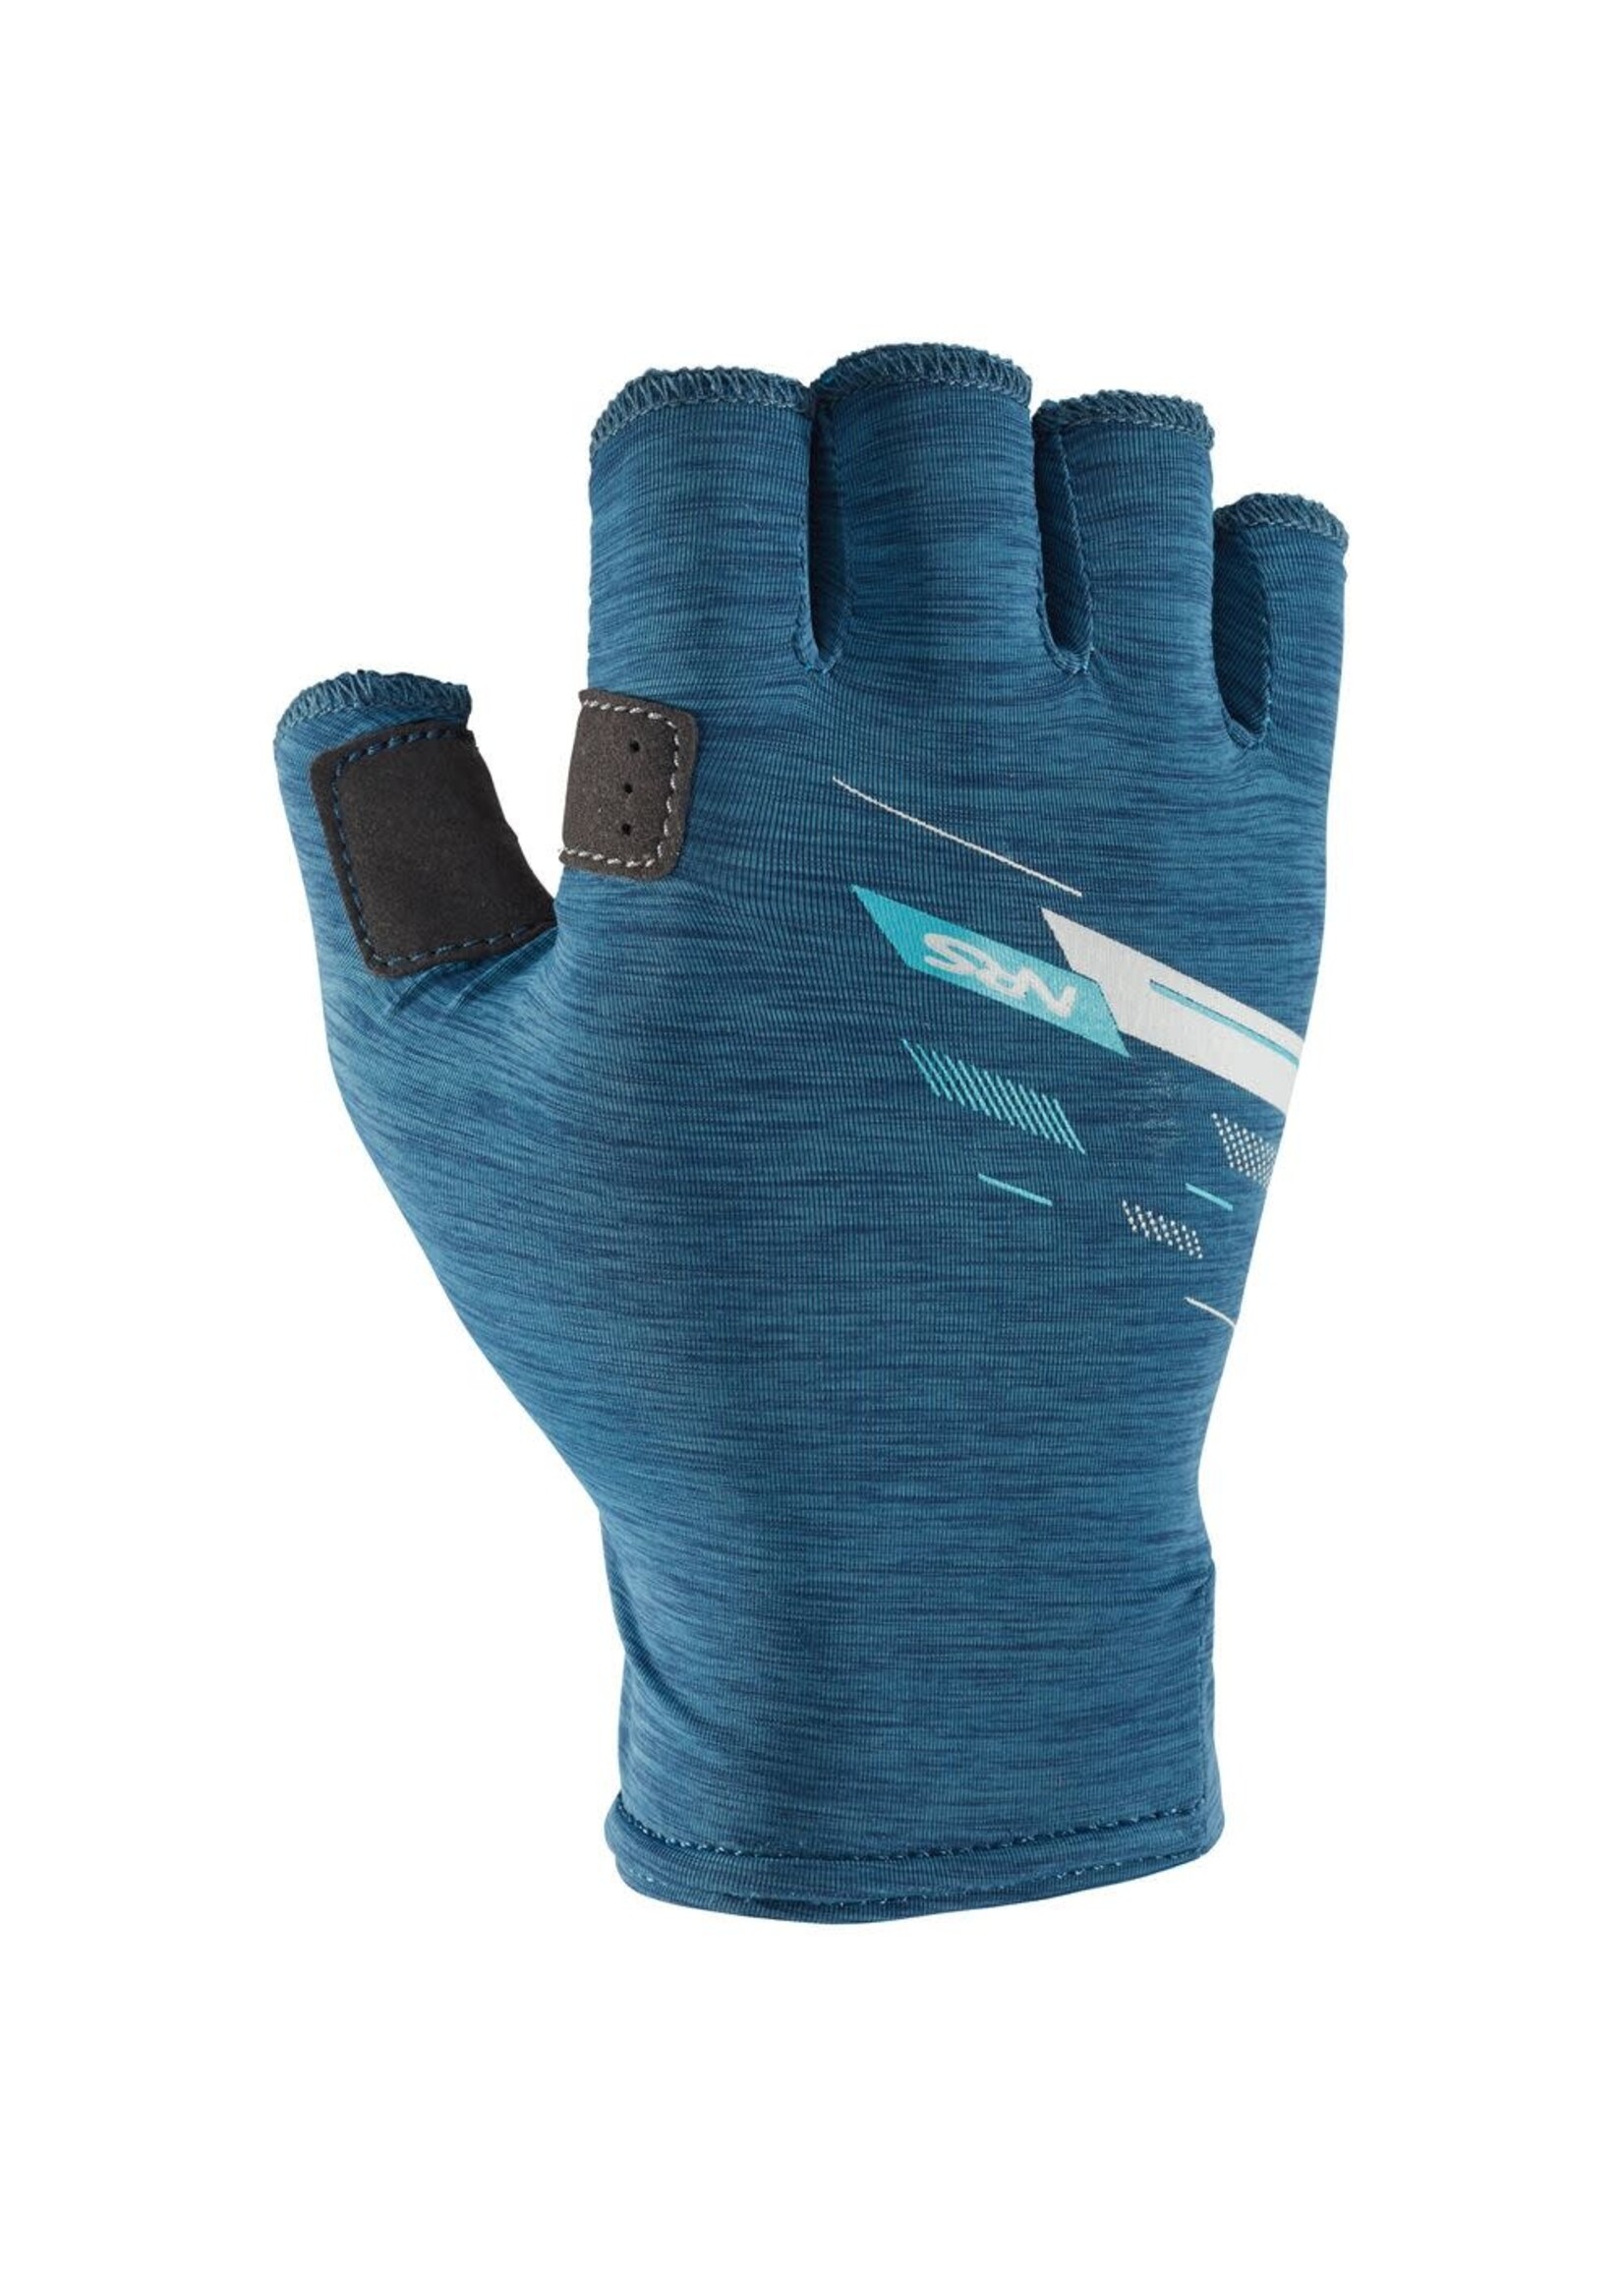 NRS NRS Mens Boater's Glove Poseidon - S